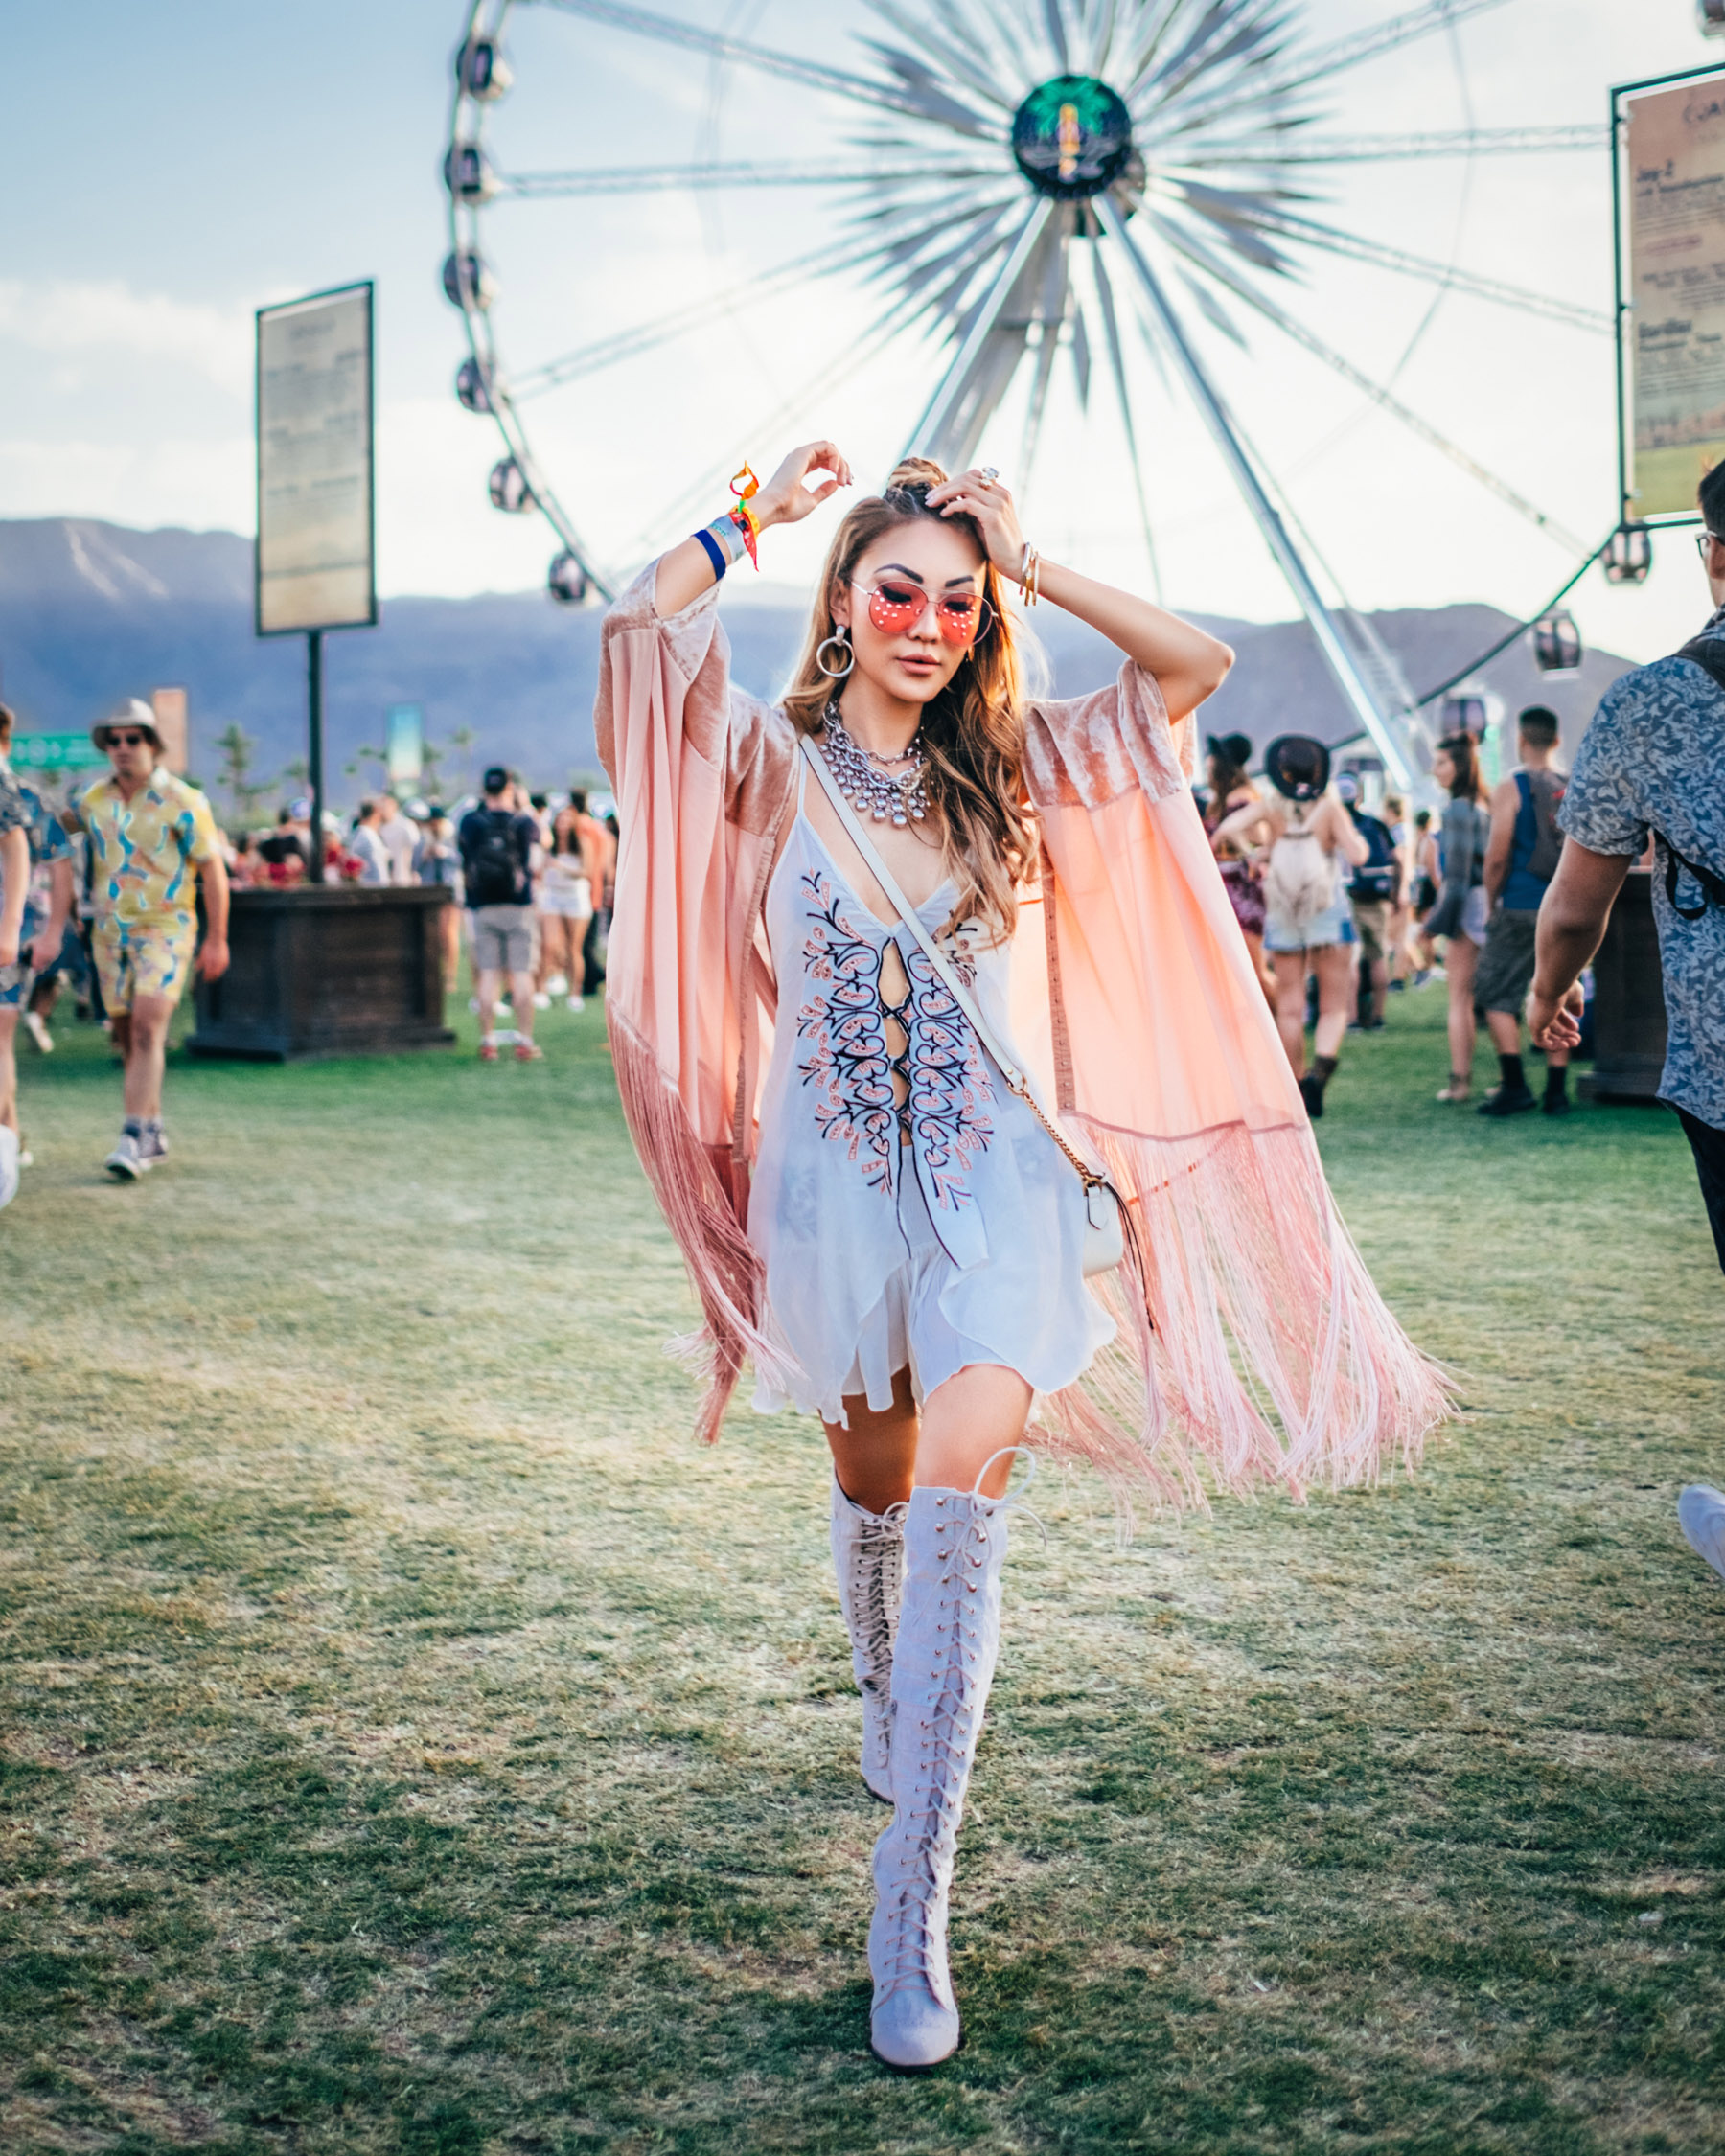 Coachella Outfits Ideas, Festival Style, Laced Up Boots Outfits for Coachel...